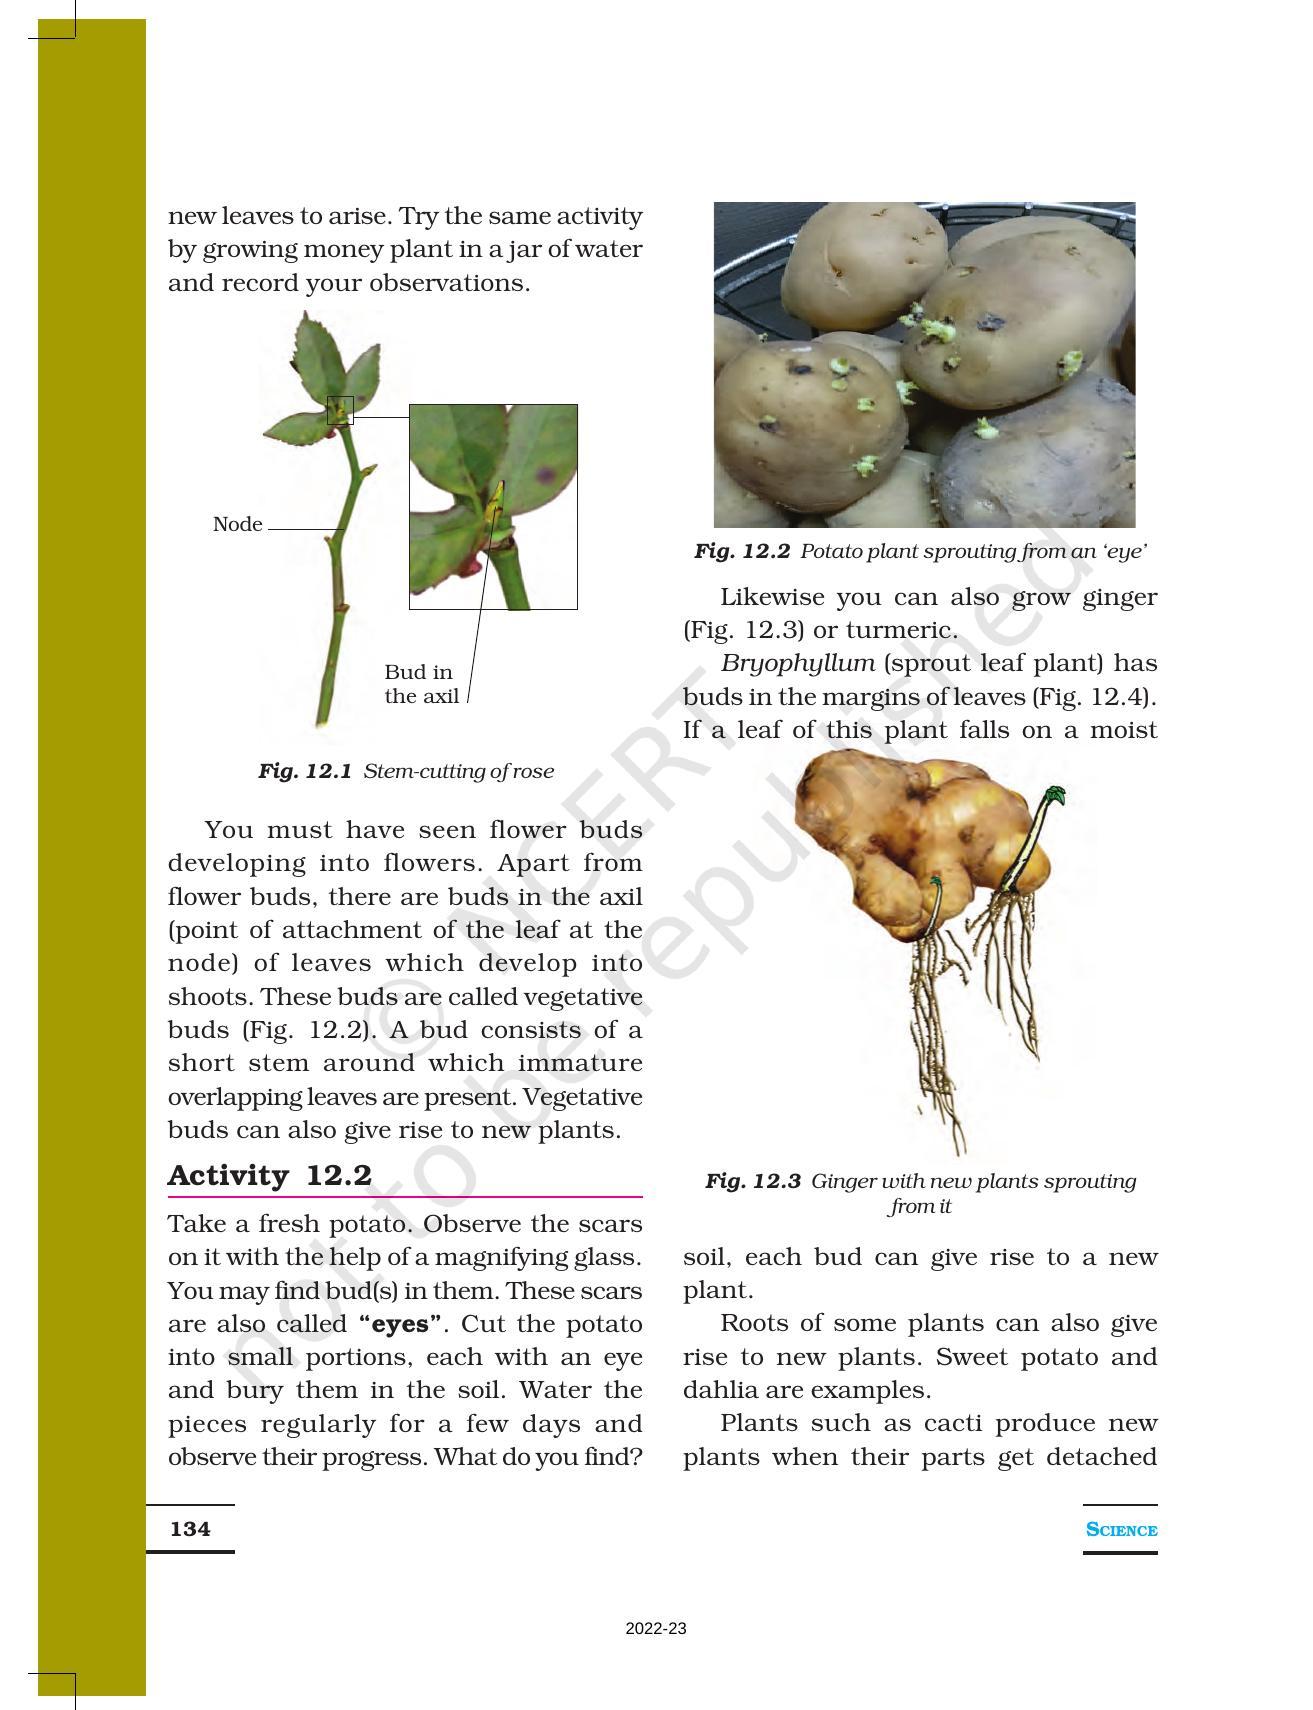 NCERT Book for Class 7 Science: Chapter 12-Reproduction in Plants - Page 2